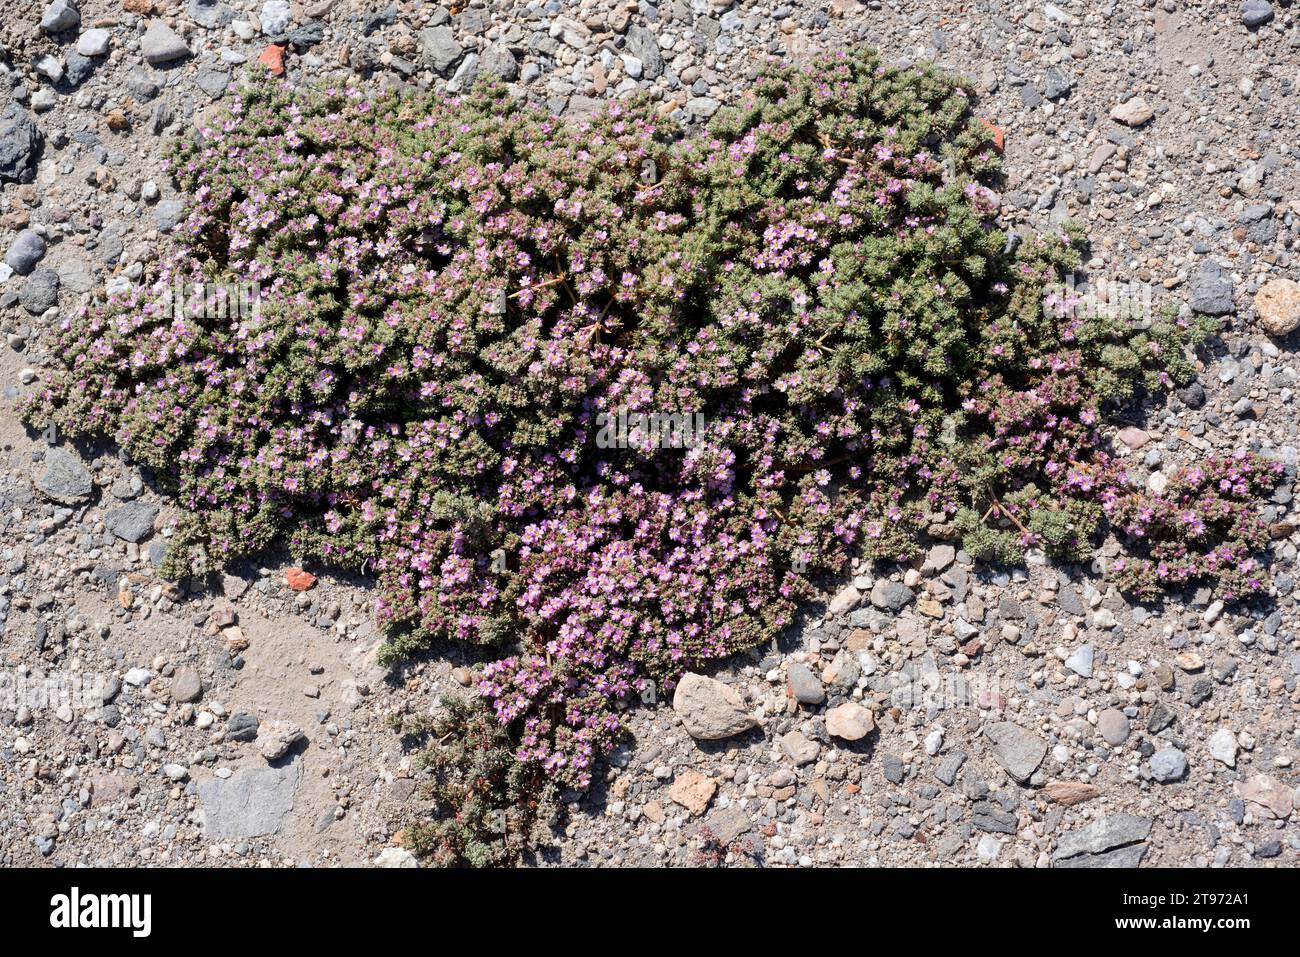 Sea heath (Frankenia laevis) is a prostrate shrub native to Europe coasts and saline soils of the interior and north Africa. This photo was taken in C Stock Photo